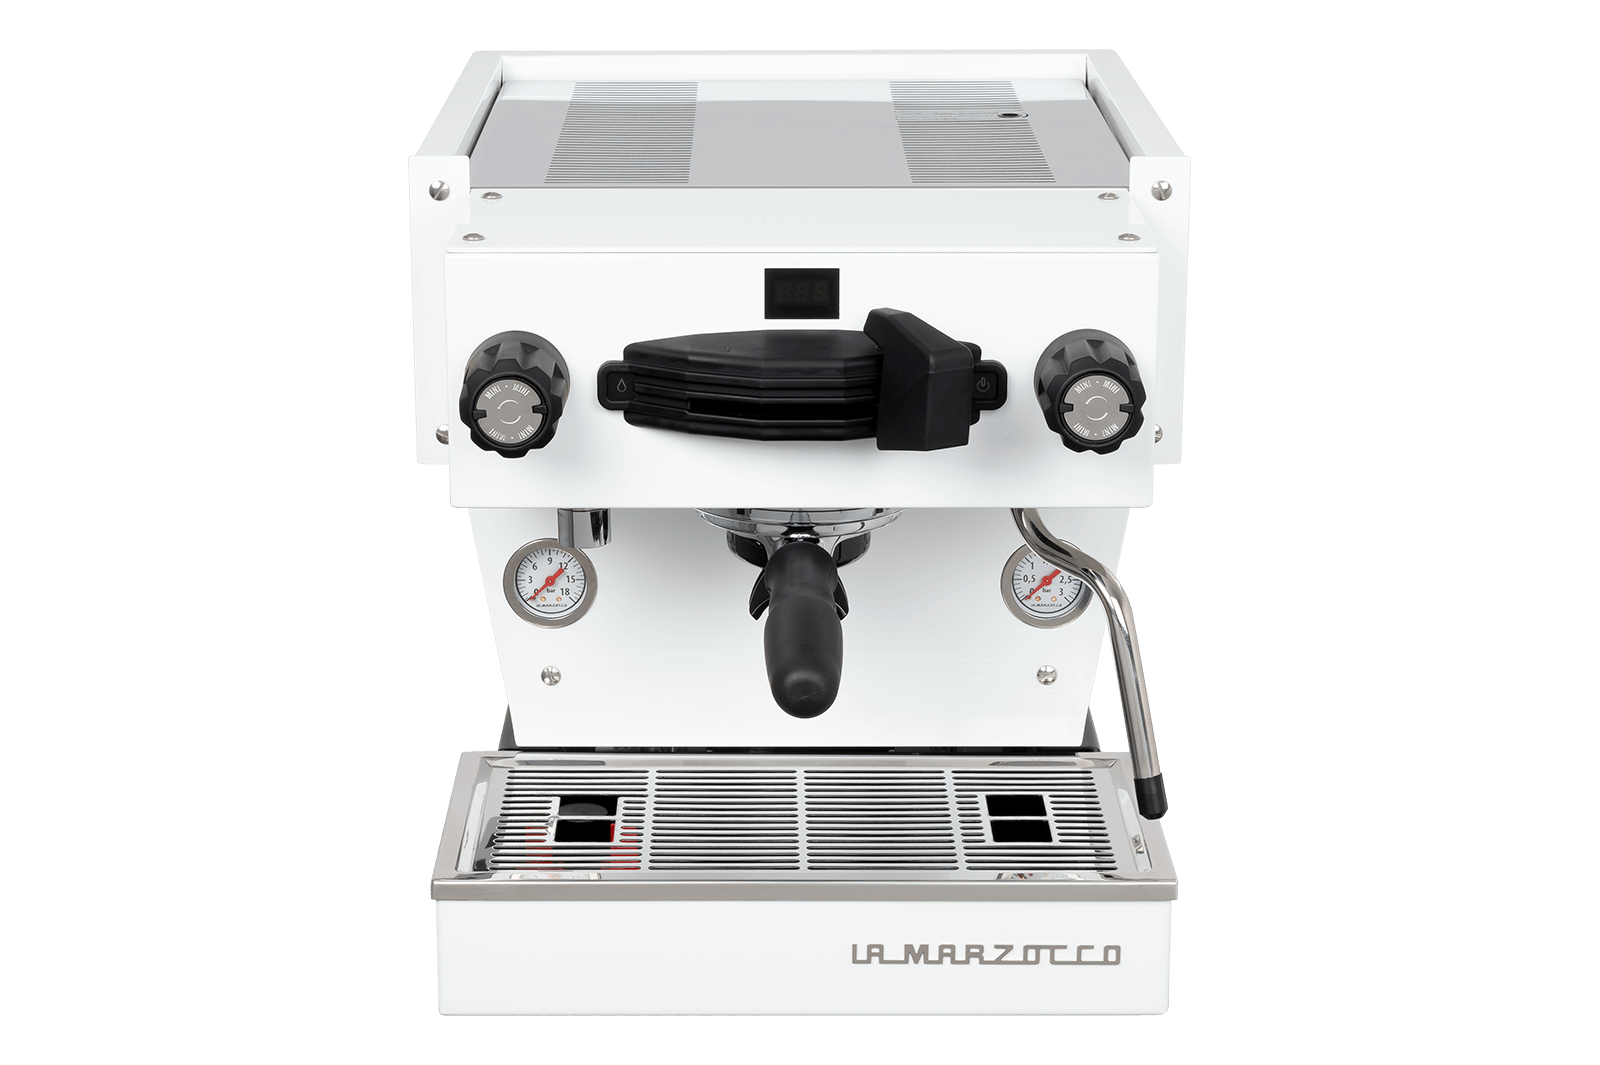 10700077-baresta-lamarzocco-lineamini-weiss-front